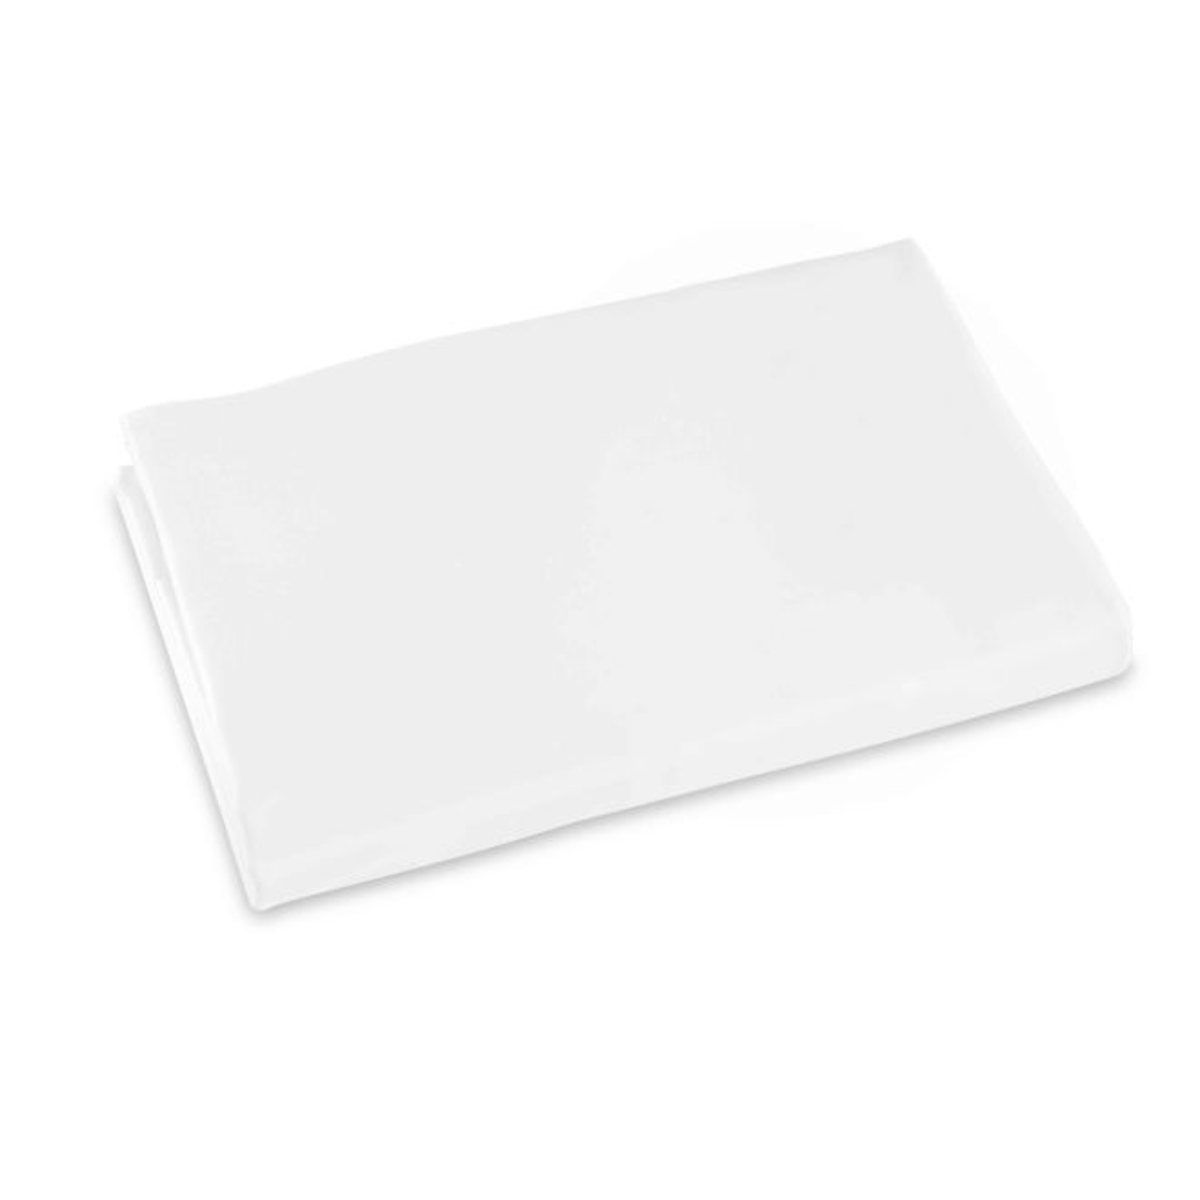 Folded Fitted Sheet of Signoria Gemma Bedding in White Color